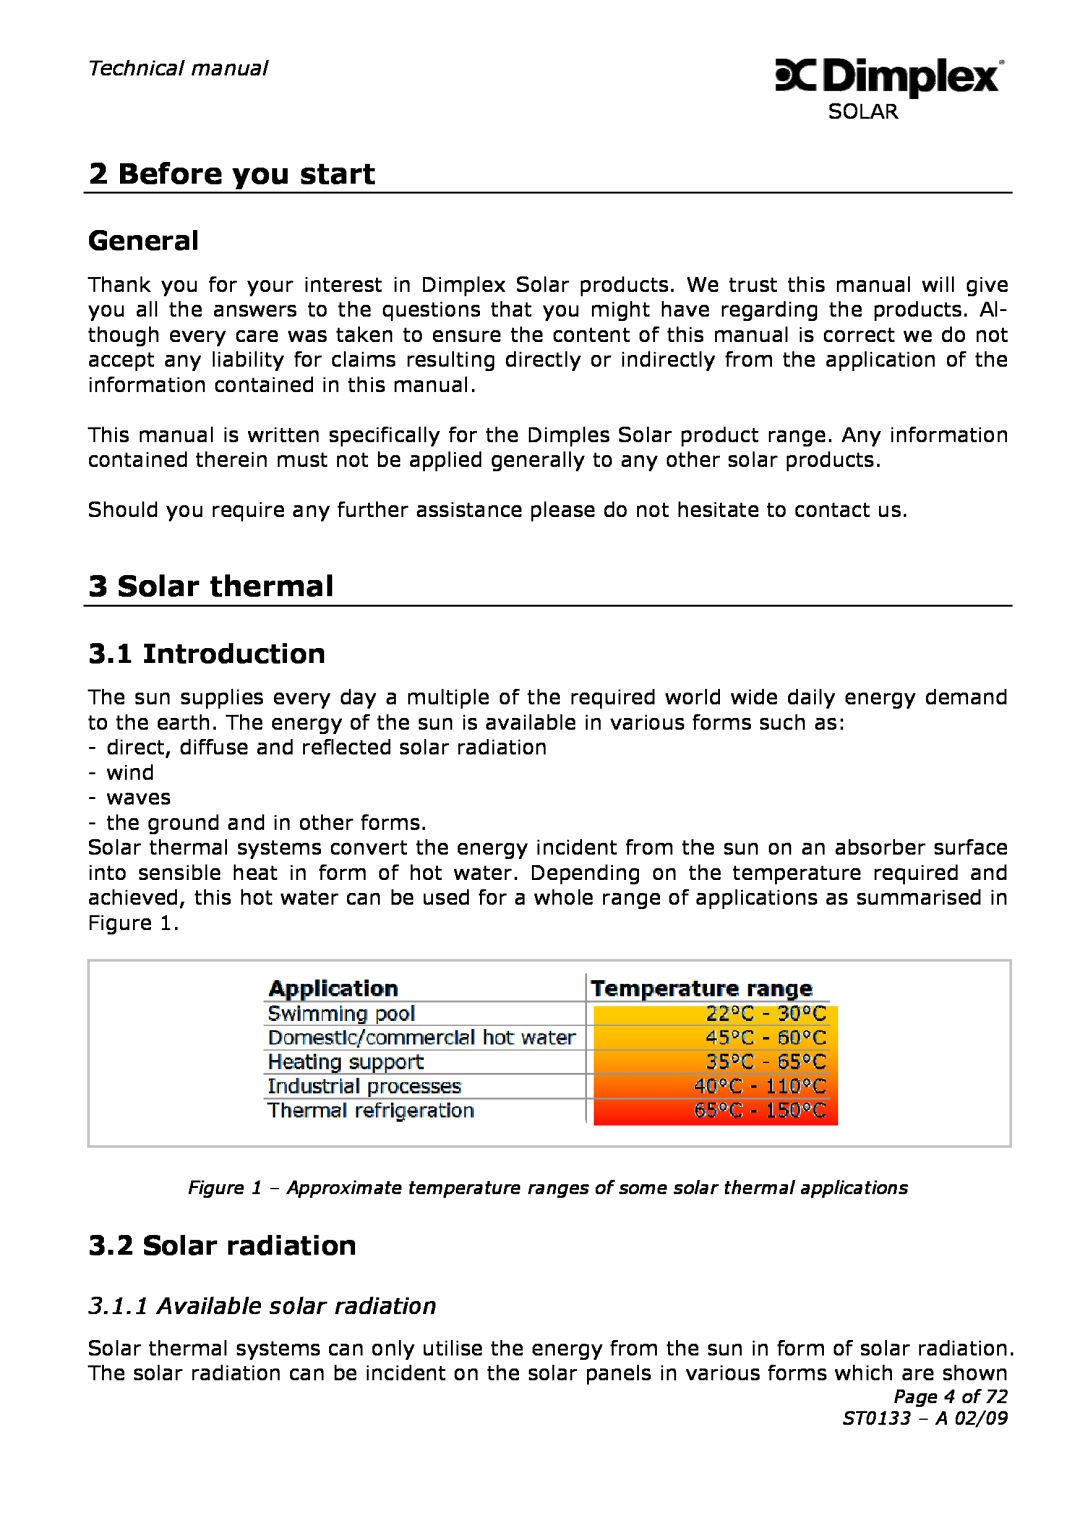 Dimplex ST0133 Before you start, Solar thermal, General, Introduction, Solar radiation, Available solar radiation 